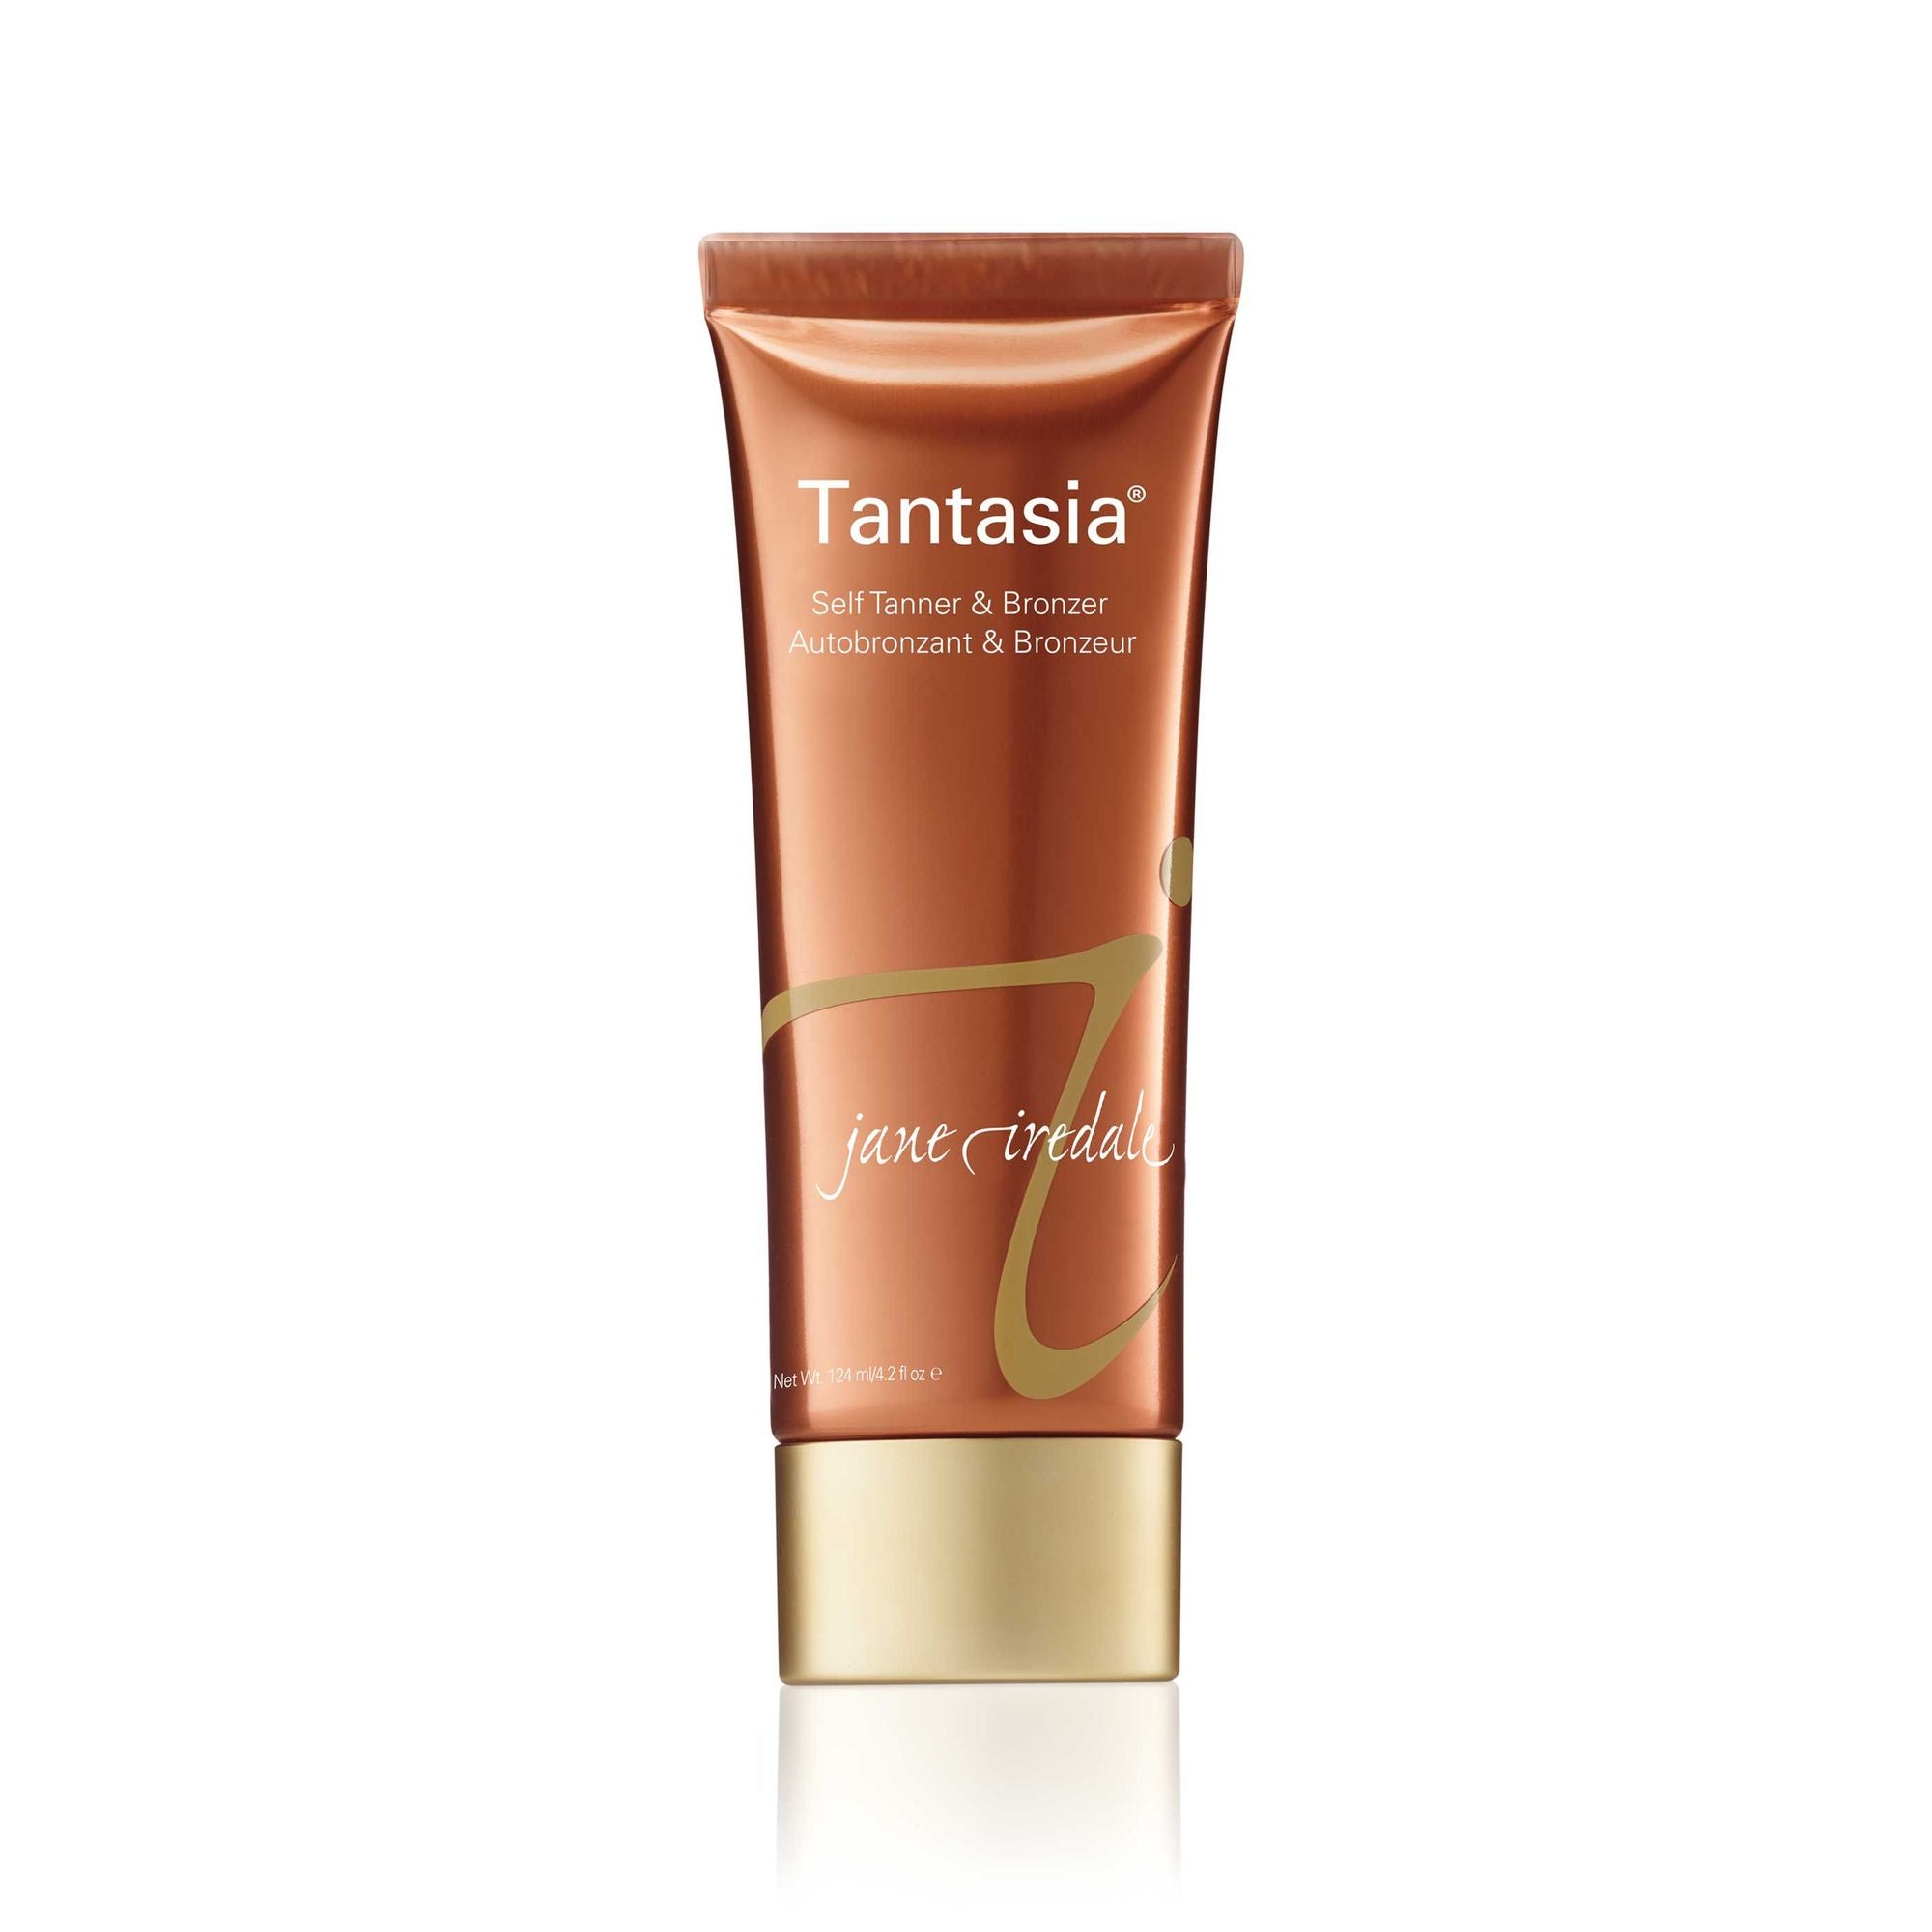 Jane Iredale's Tantasia Self Tanner and Bronzer